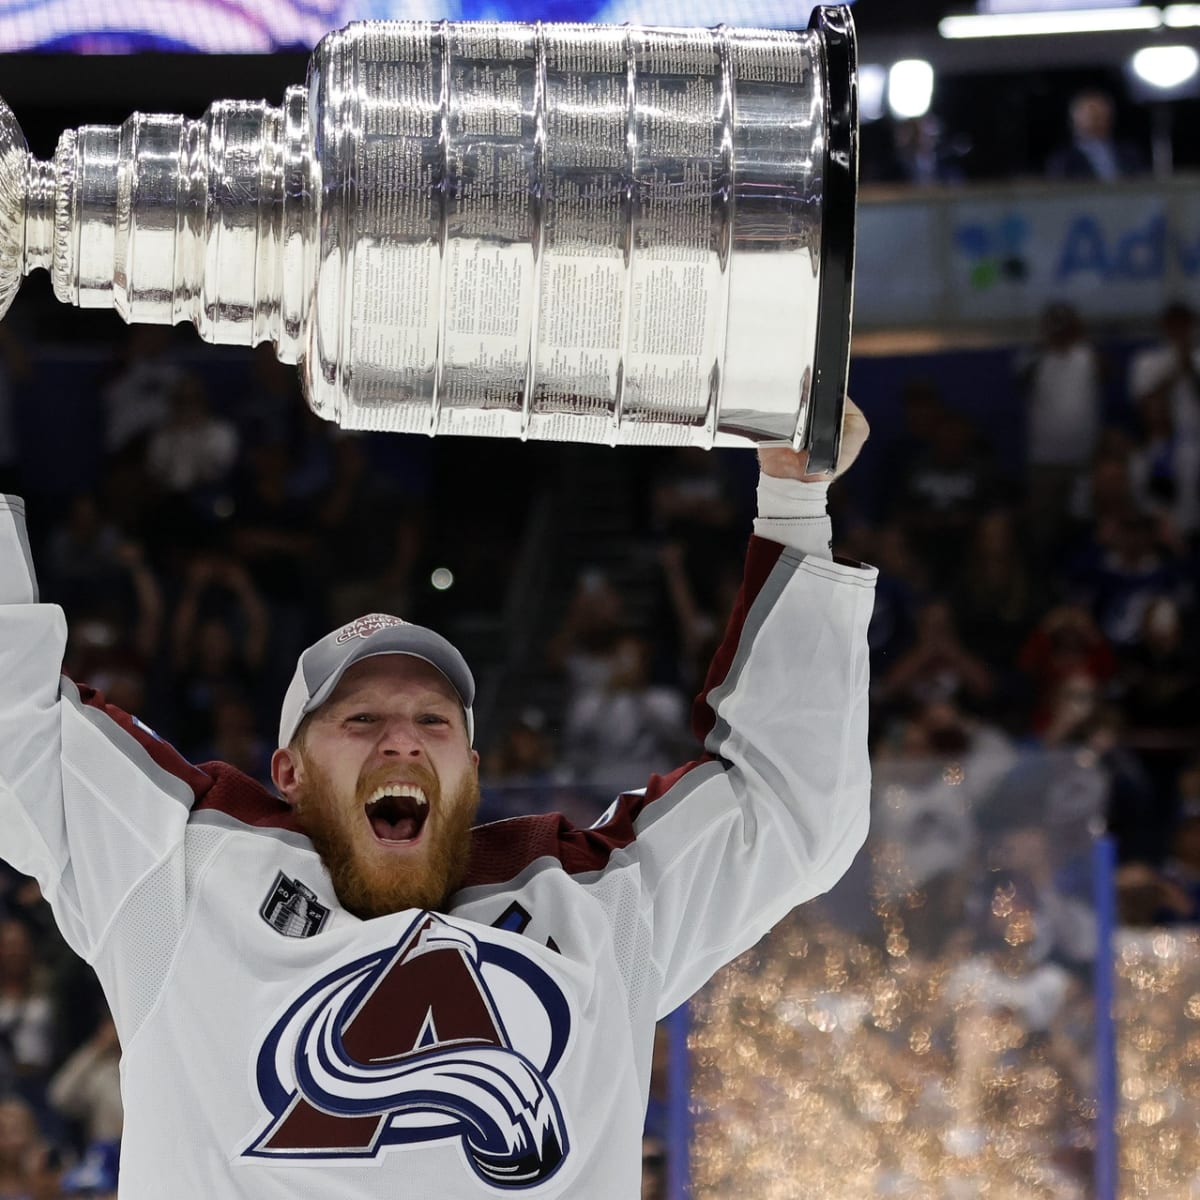 Avs Mailbag: Will Avalanche name new captain while Gabe Landeskog is out?